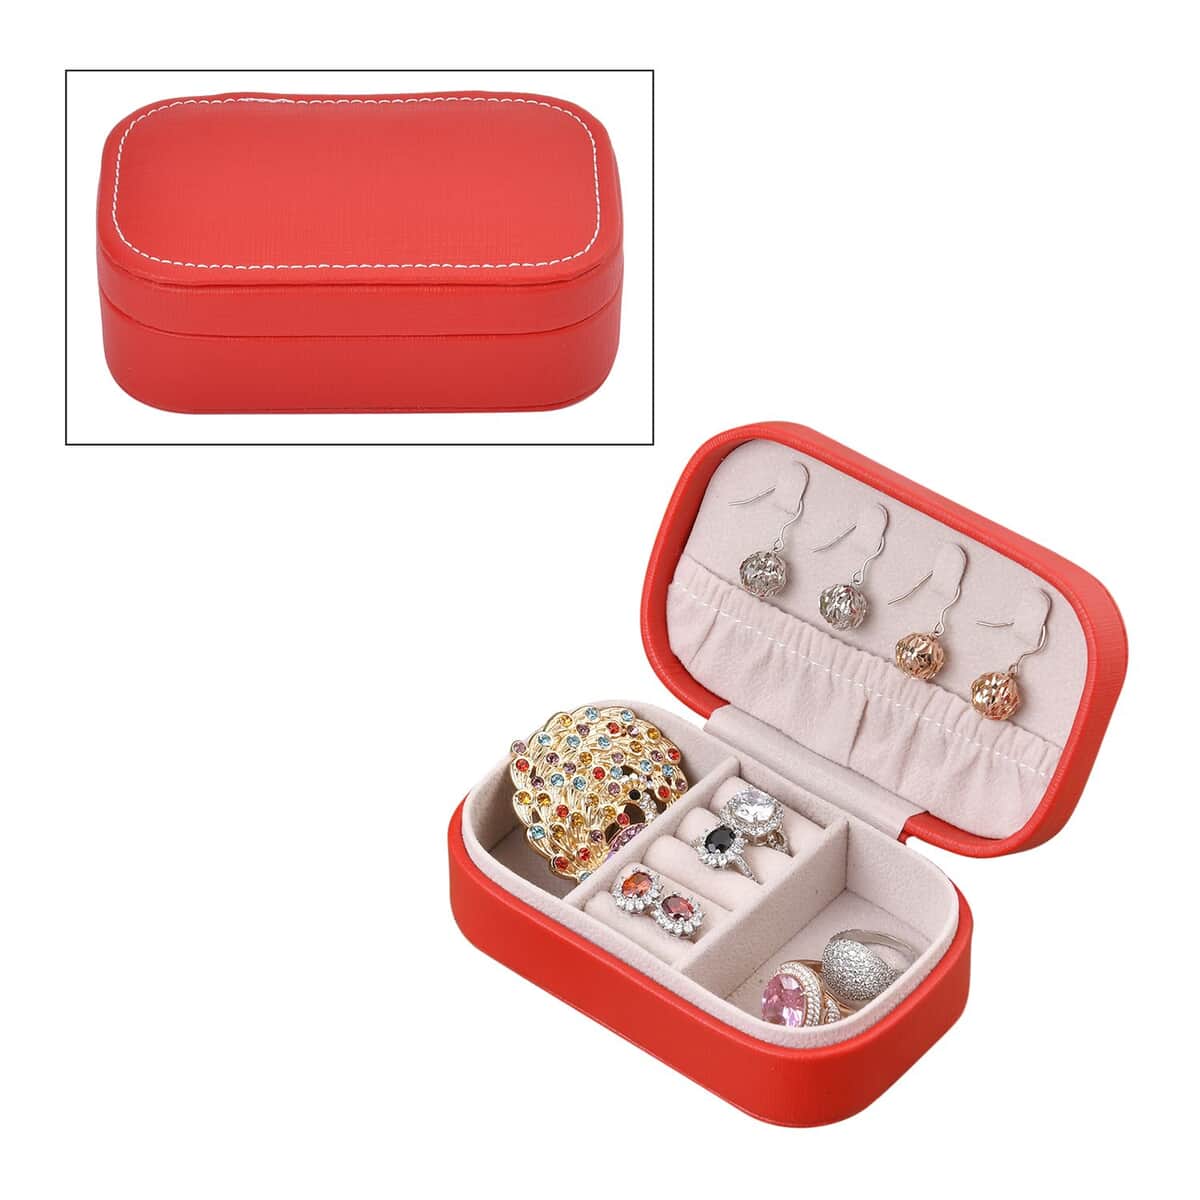 Red Faux Leather Oval Shape Jewelry Box (4 Necklace Hooks, Pouch Pocket, 4 Ring Slot) image number 0